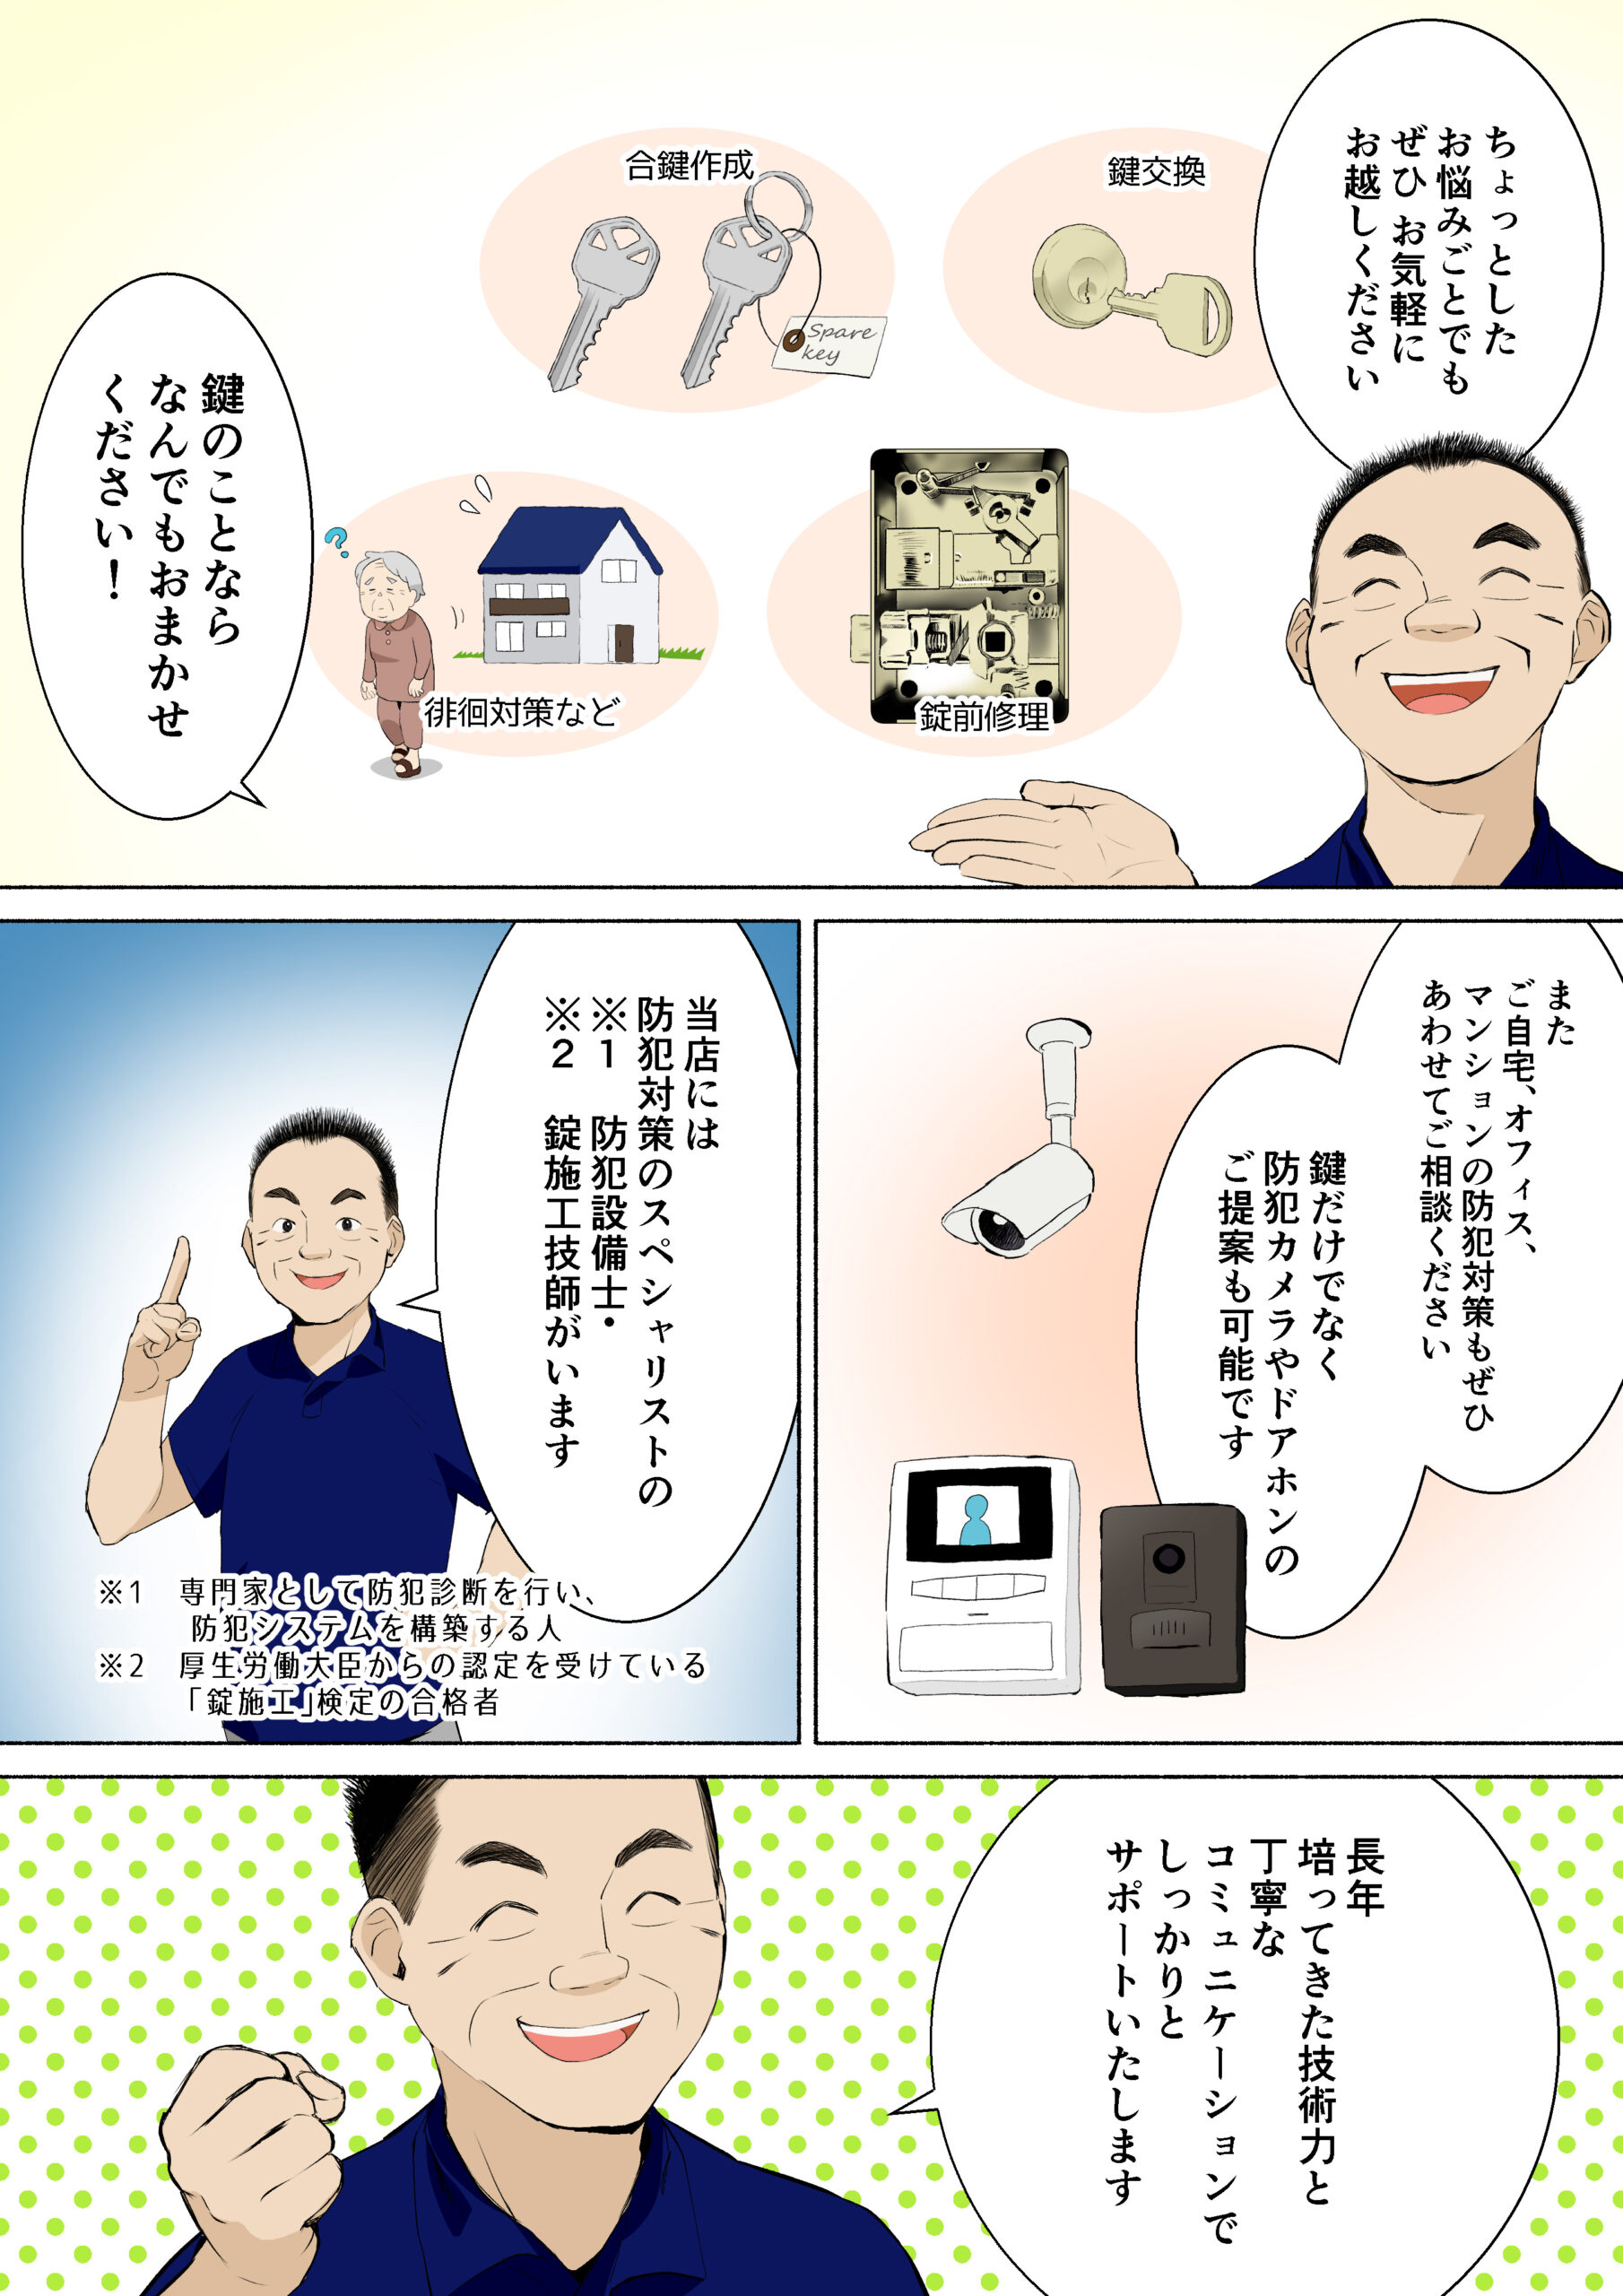 STAYGOLD株式会社 西東京ロックサービスさま紹介漫画